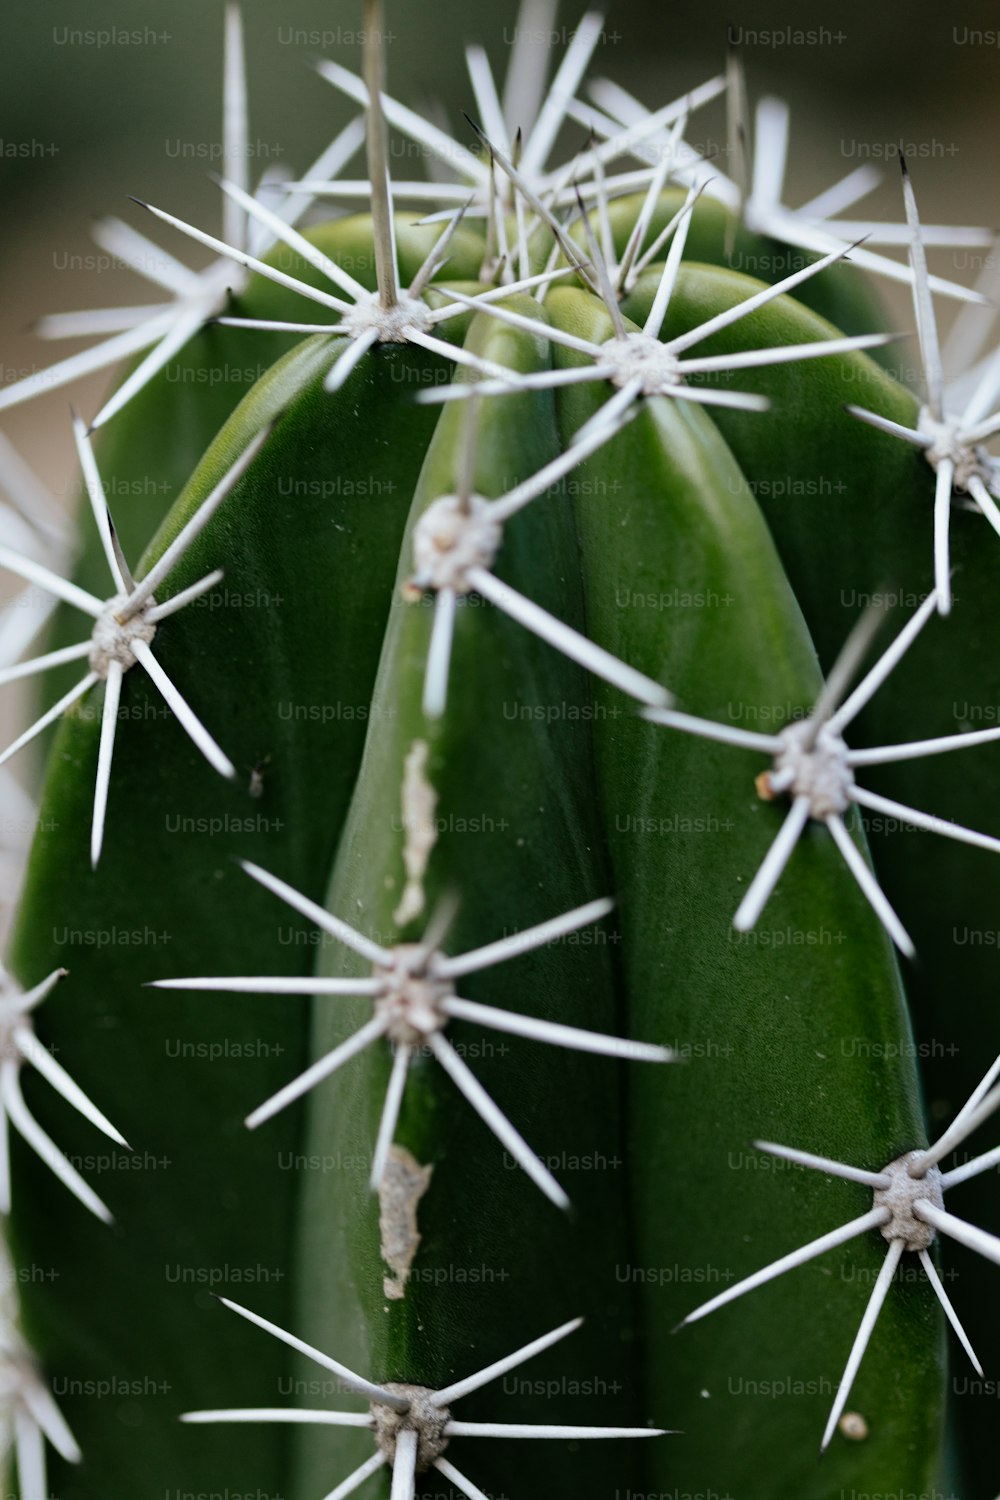 a close up of a cactus with many spikes